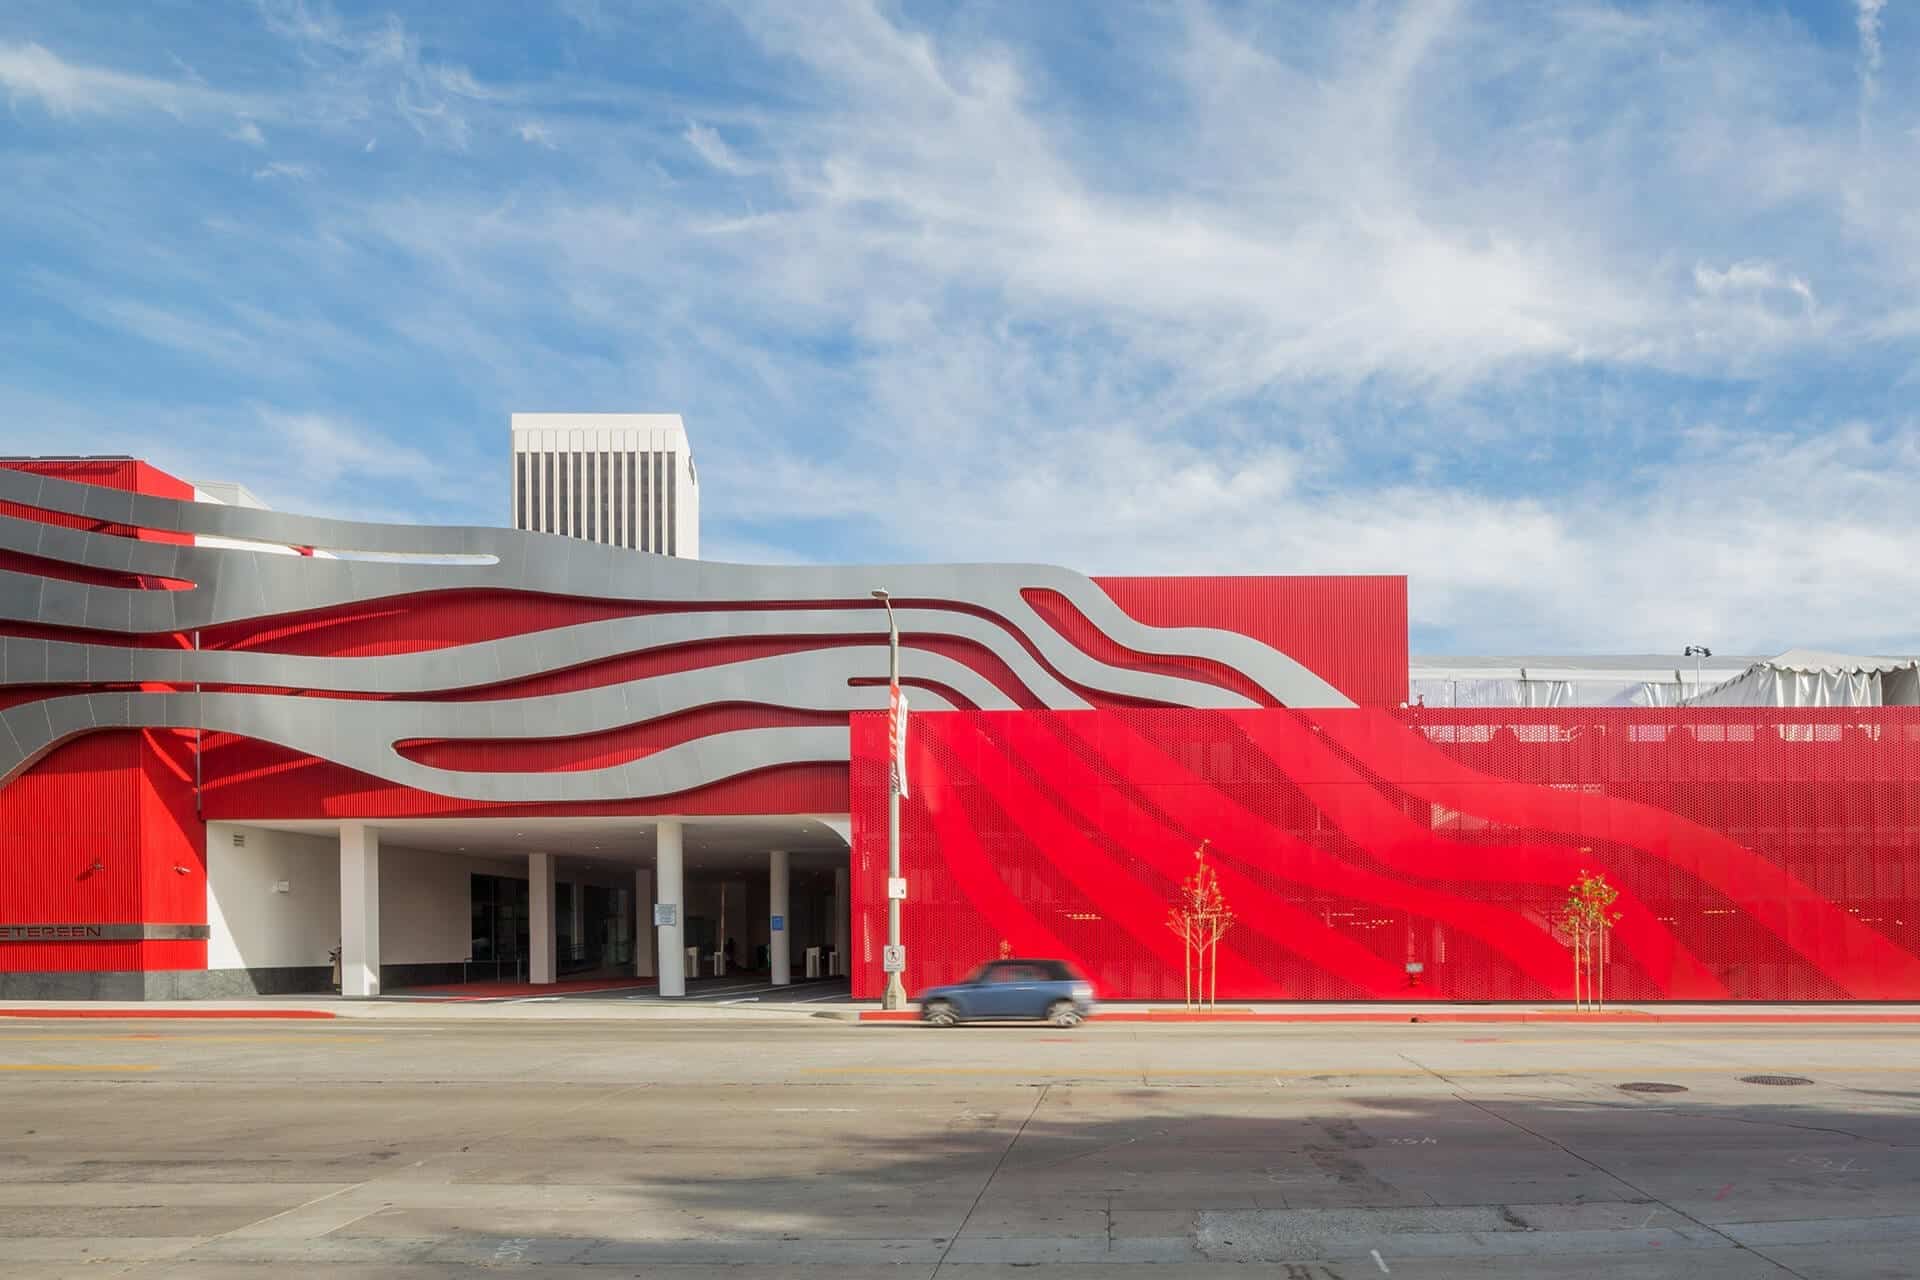 Perforated metal screenwall by Zahner continues the Petersen Automotive Museum's sculptural motif.